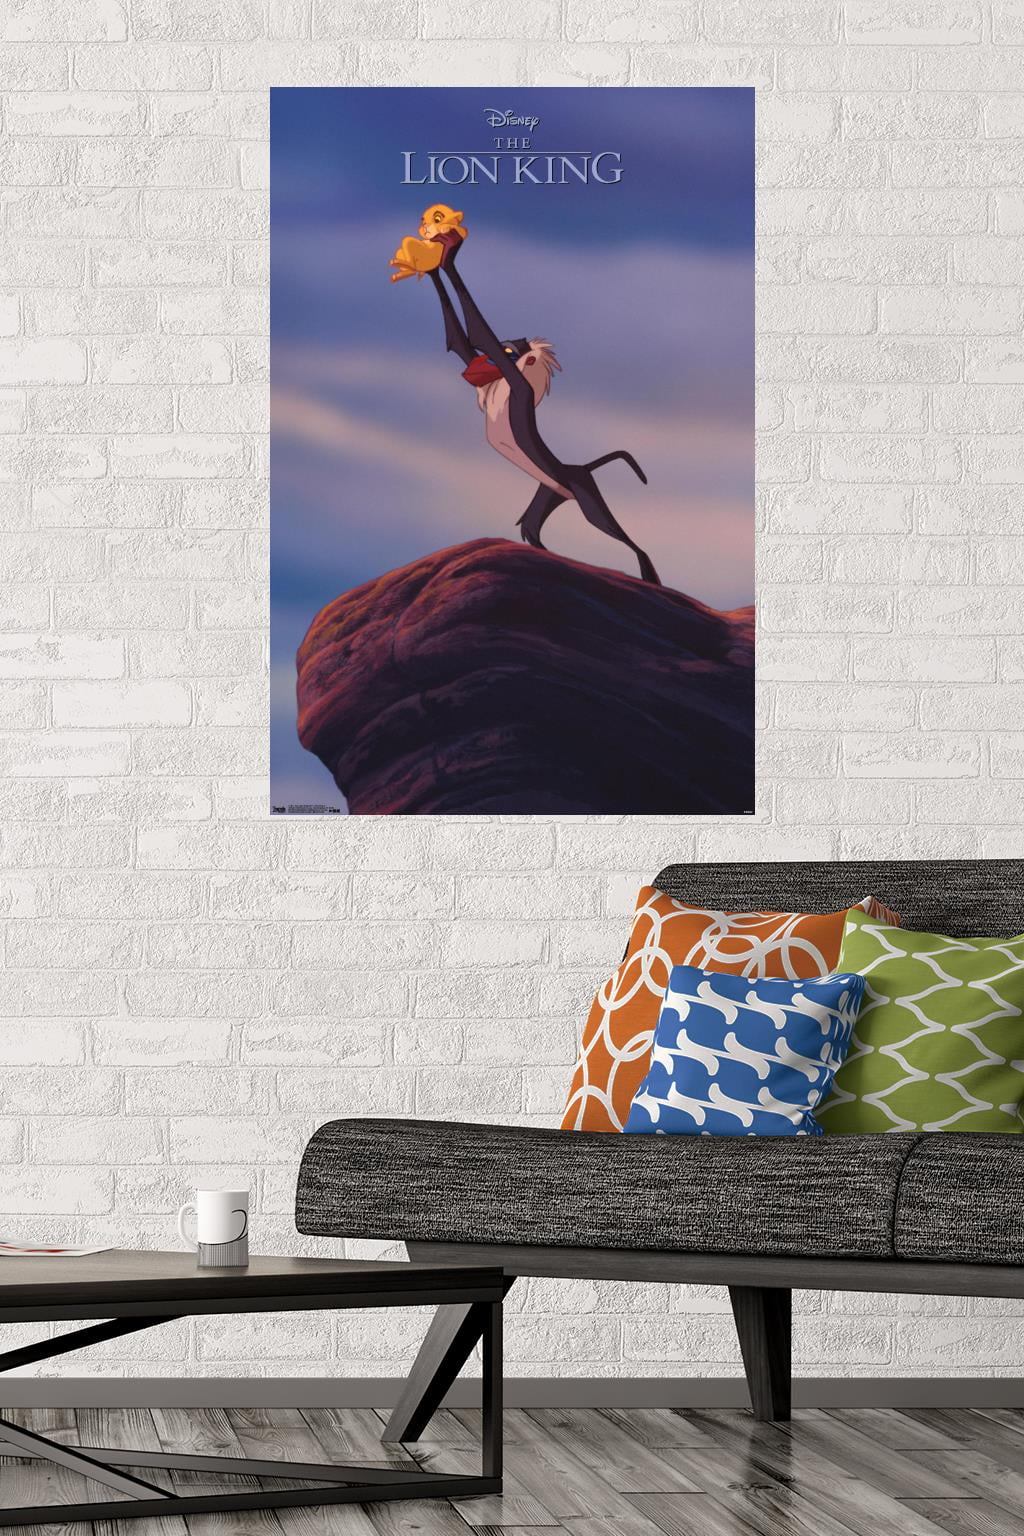 Disney The Lion King 1994 - Pride Rock Wall Poster, 22.375